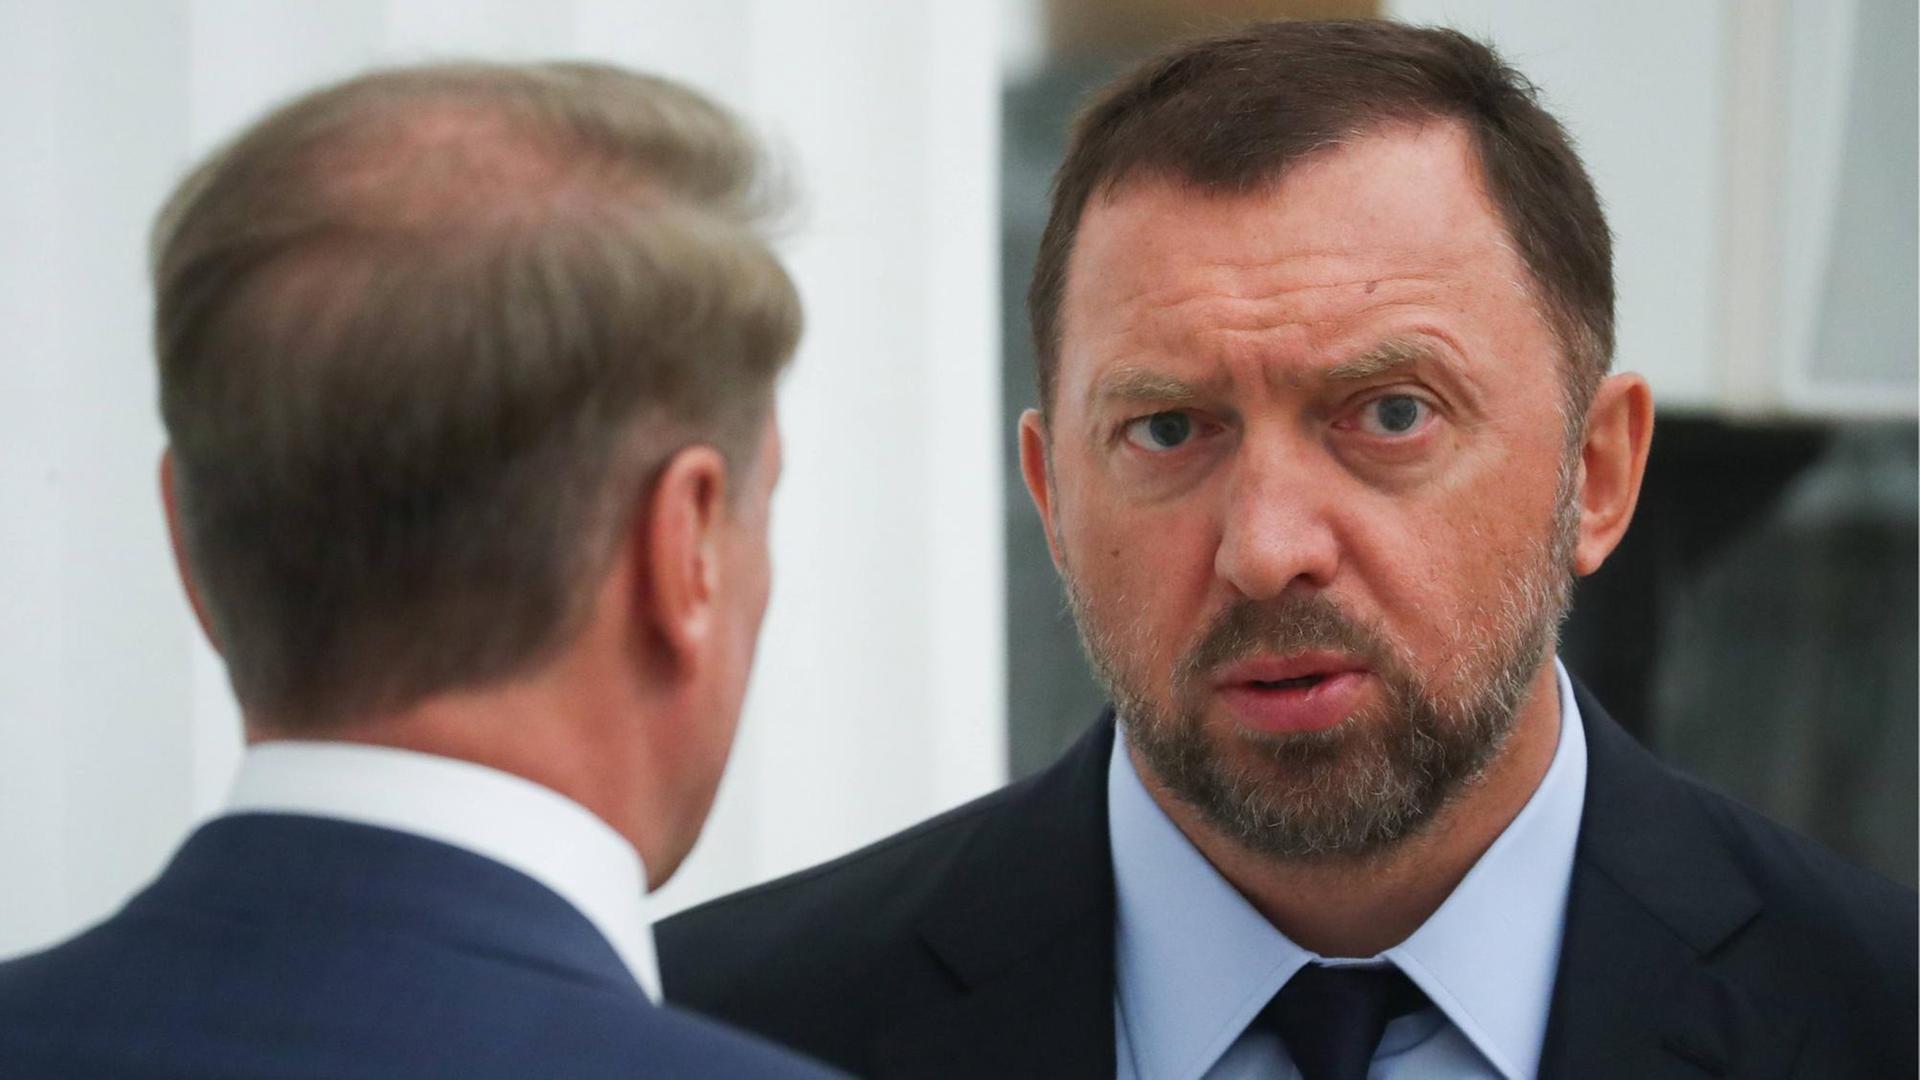 Sberbank CEO and Chairman of the Executive Board German Gref (L) and Rusal President and Management Board Member Oleg Deripaska talking ahead of a meeting of Russian President Vladimr Putin with Russian businessmen at the Moscow Kremlin.